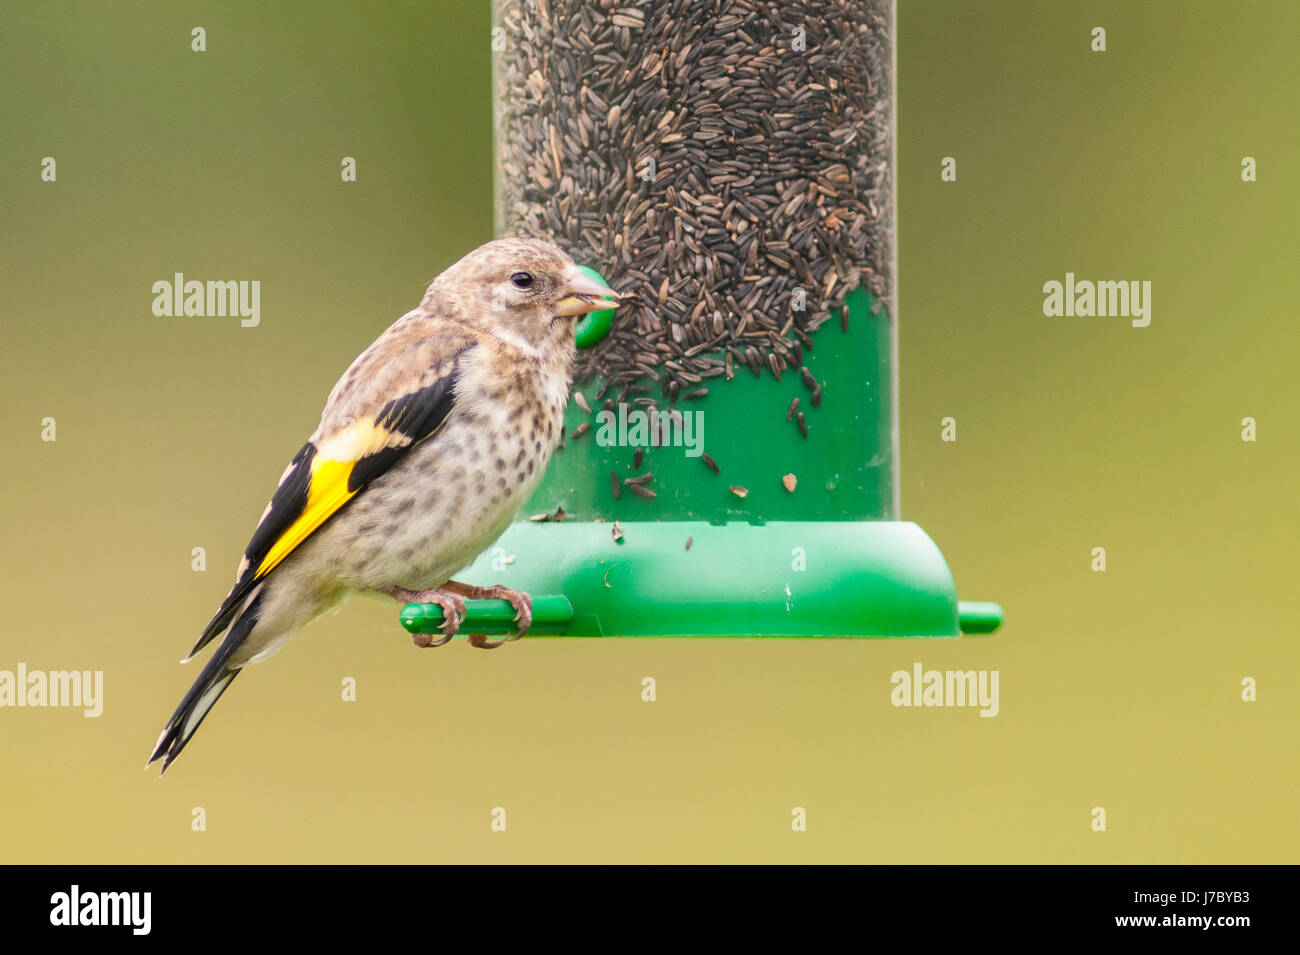 A young Goldfinch (Carduelis carduelis) eating niger seeds in the Uk Stock Photo